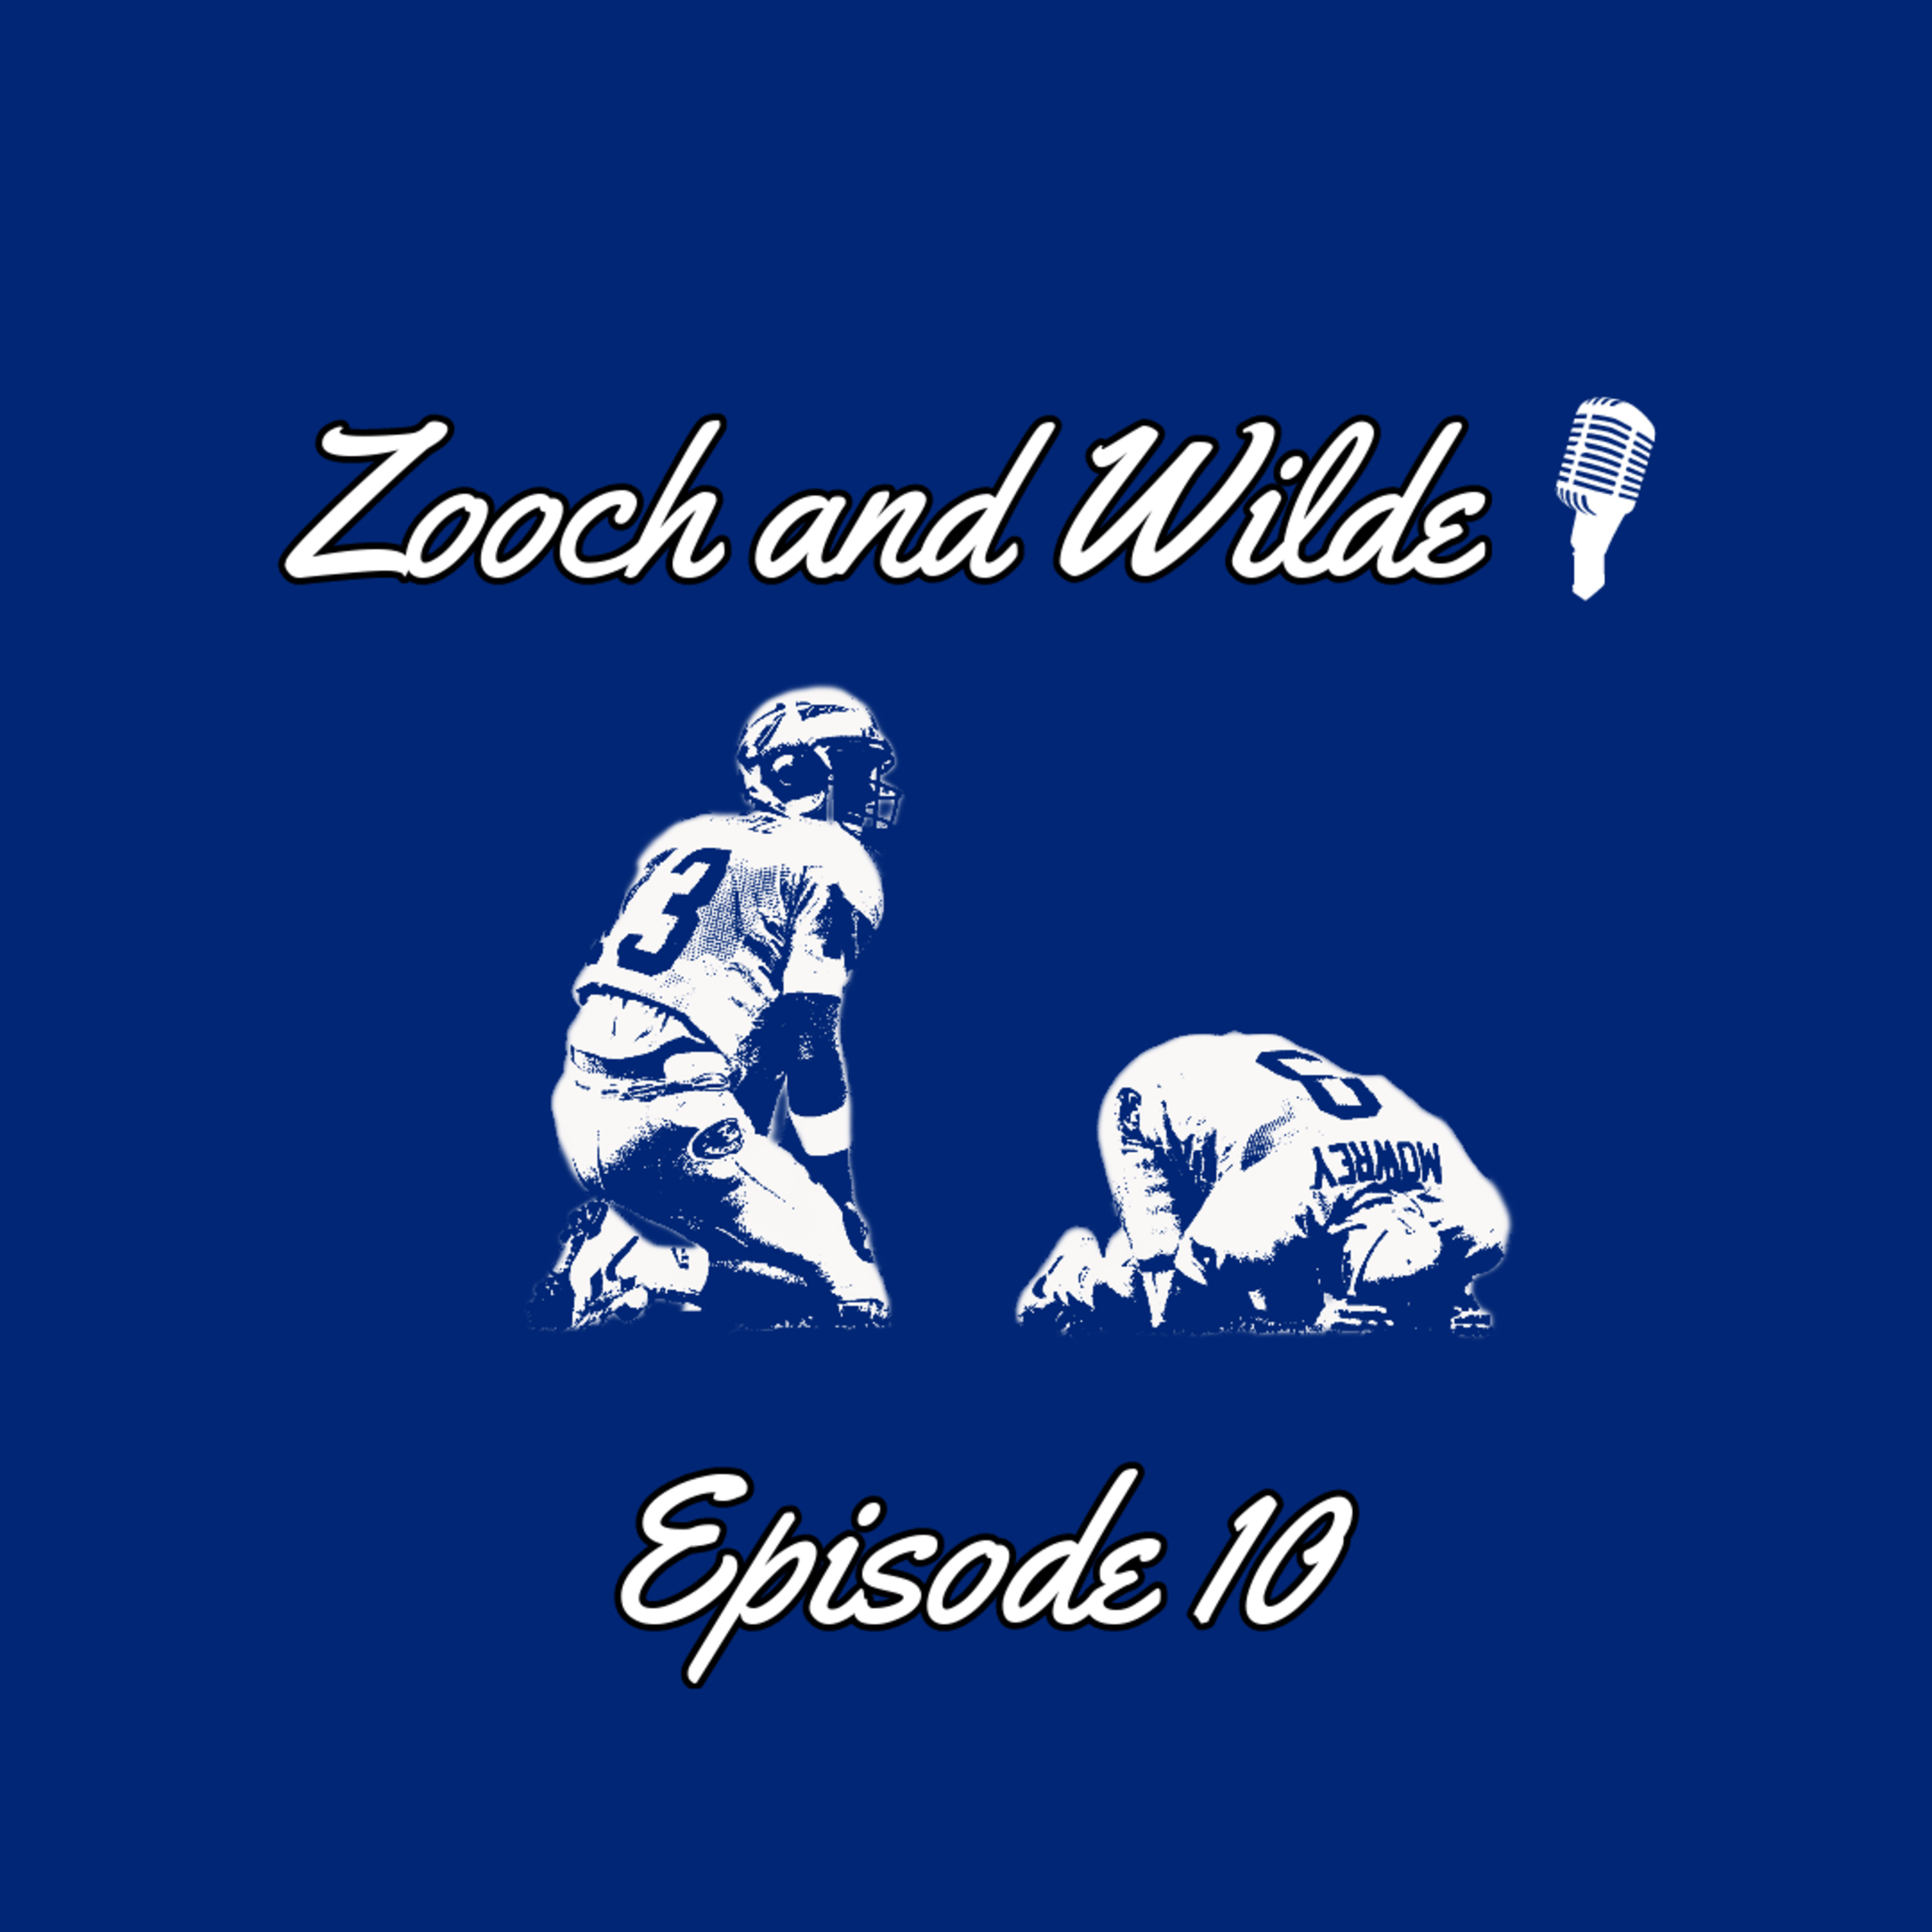 Zooch and Wilde Episode 10: